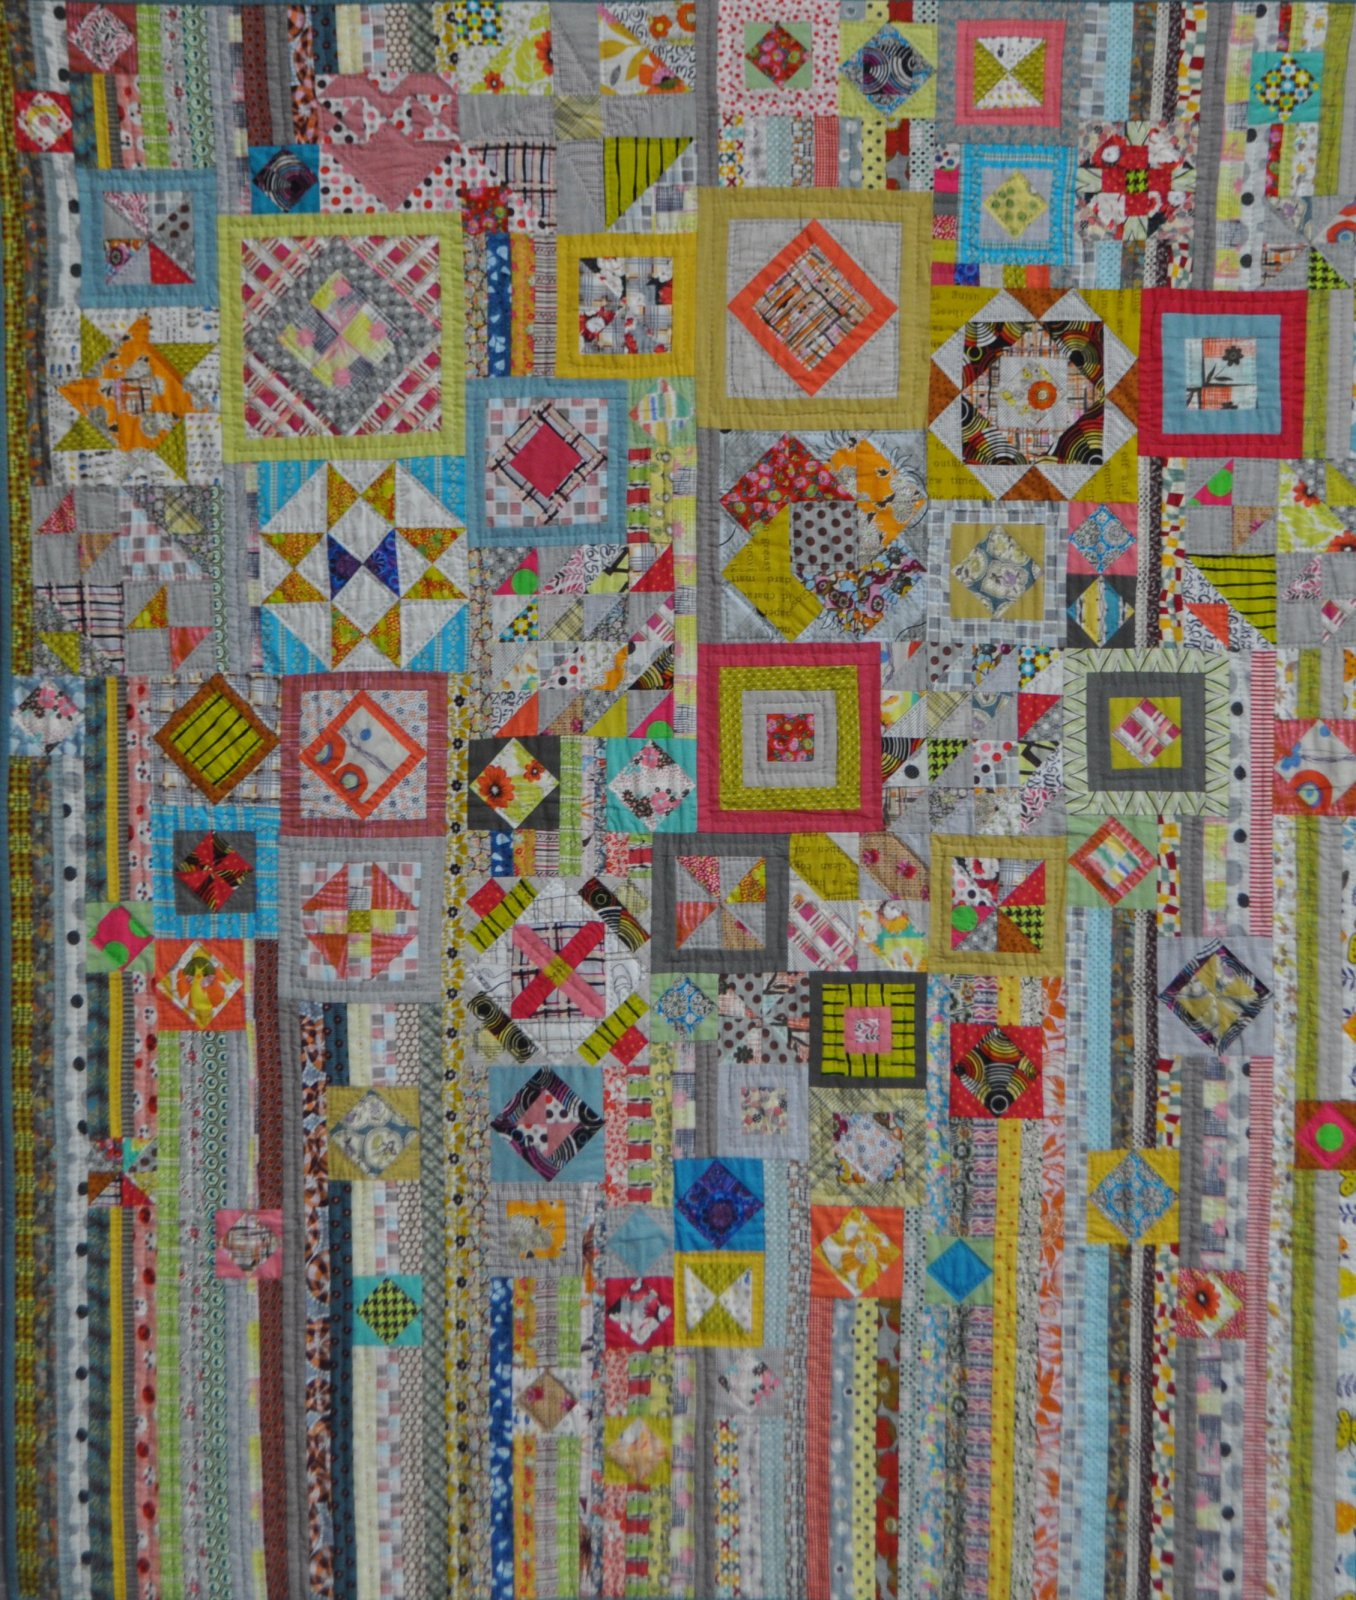 Gypsy Wife Quilt Spreadsheet Throughout Gypsy Wife Quilt Pattern  Pattern Design Inspiration  Gypsy Wife